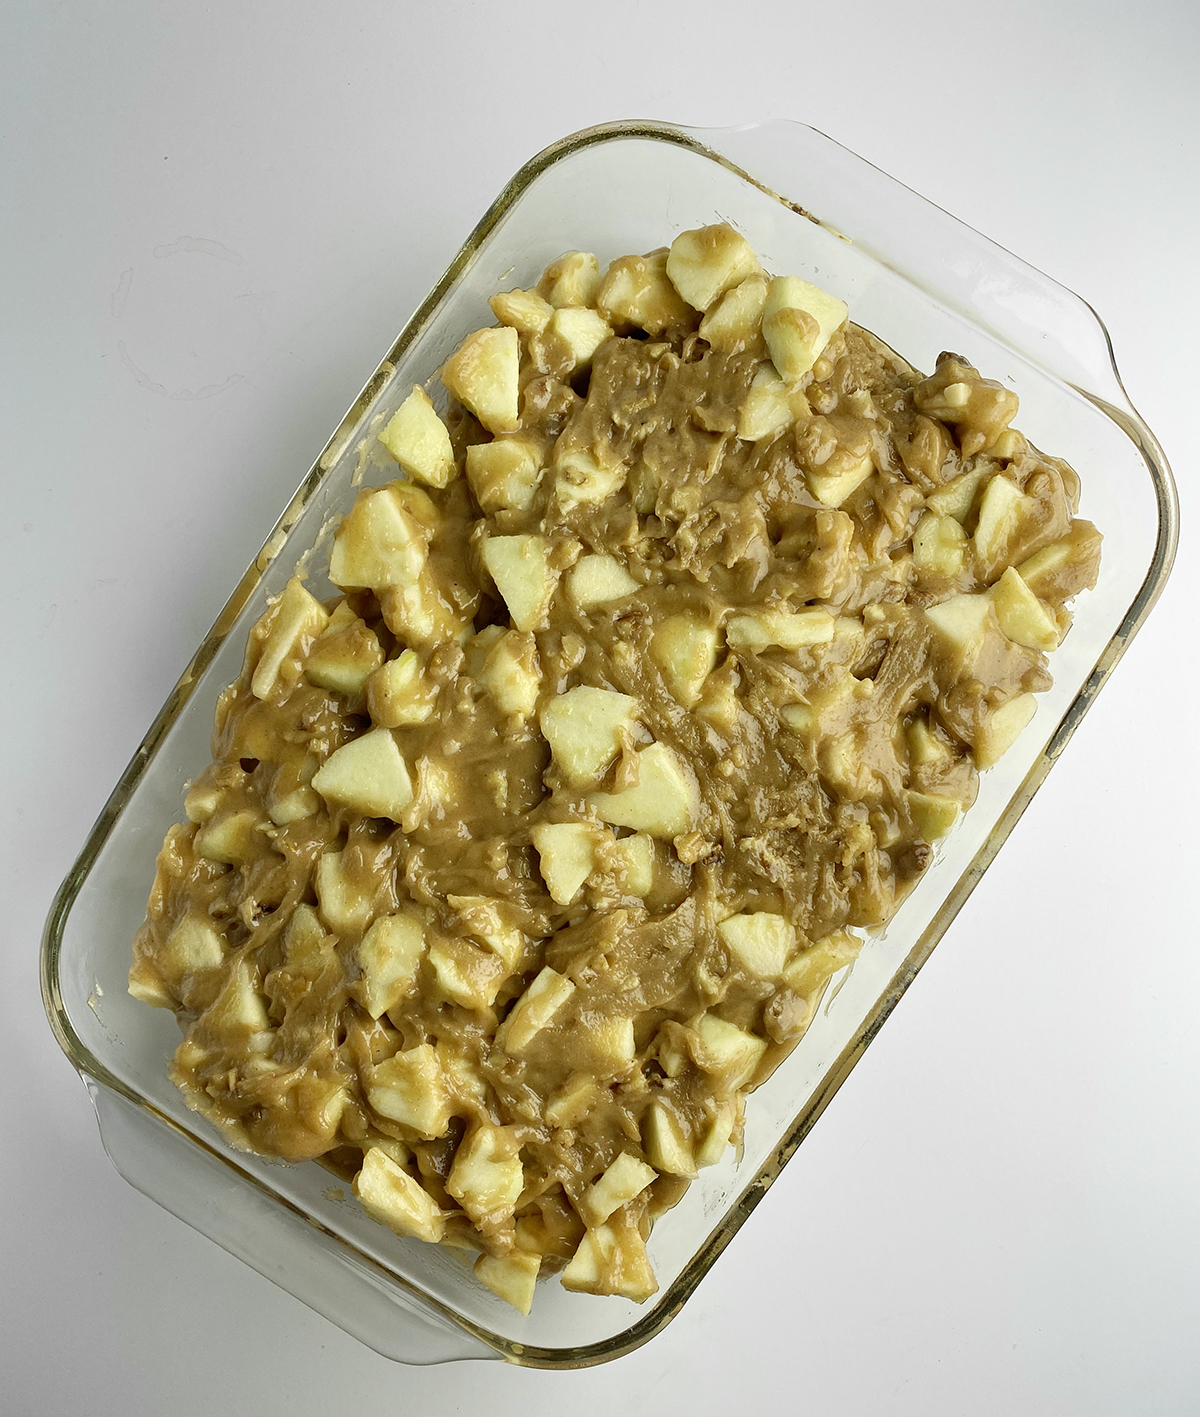 Caramel apple cake in a casserole dish ready for the oven.